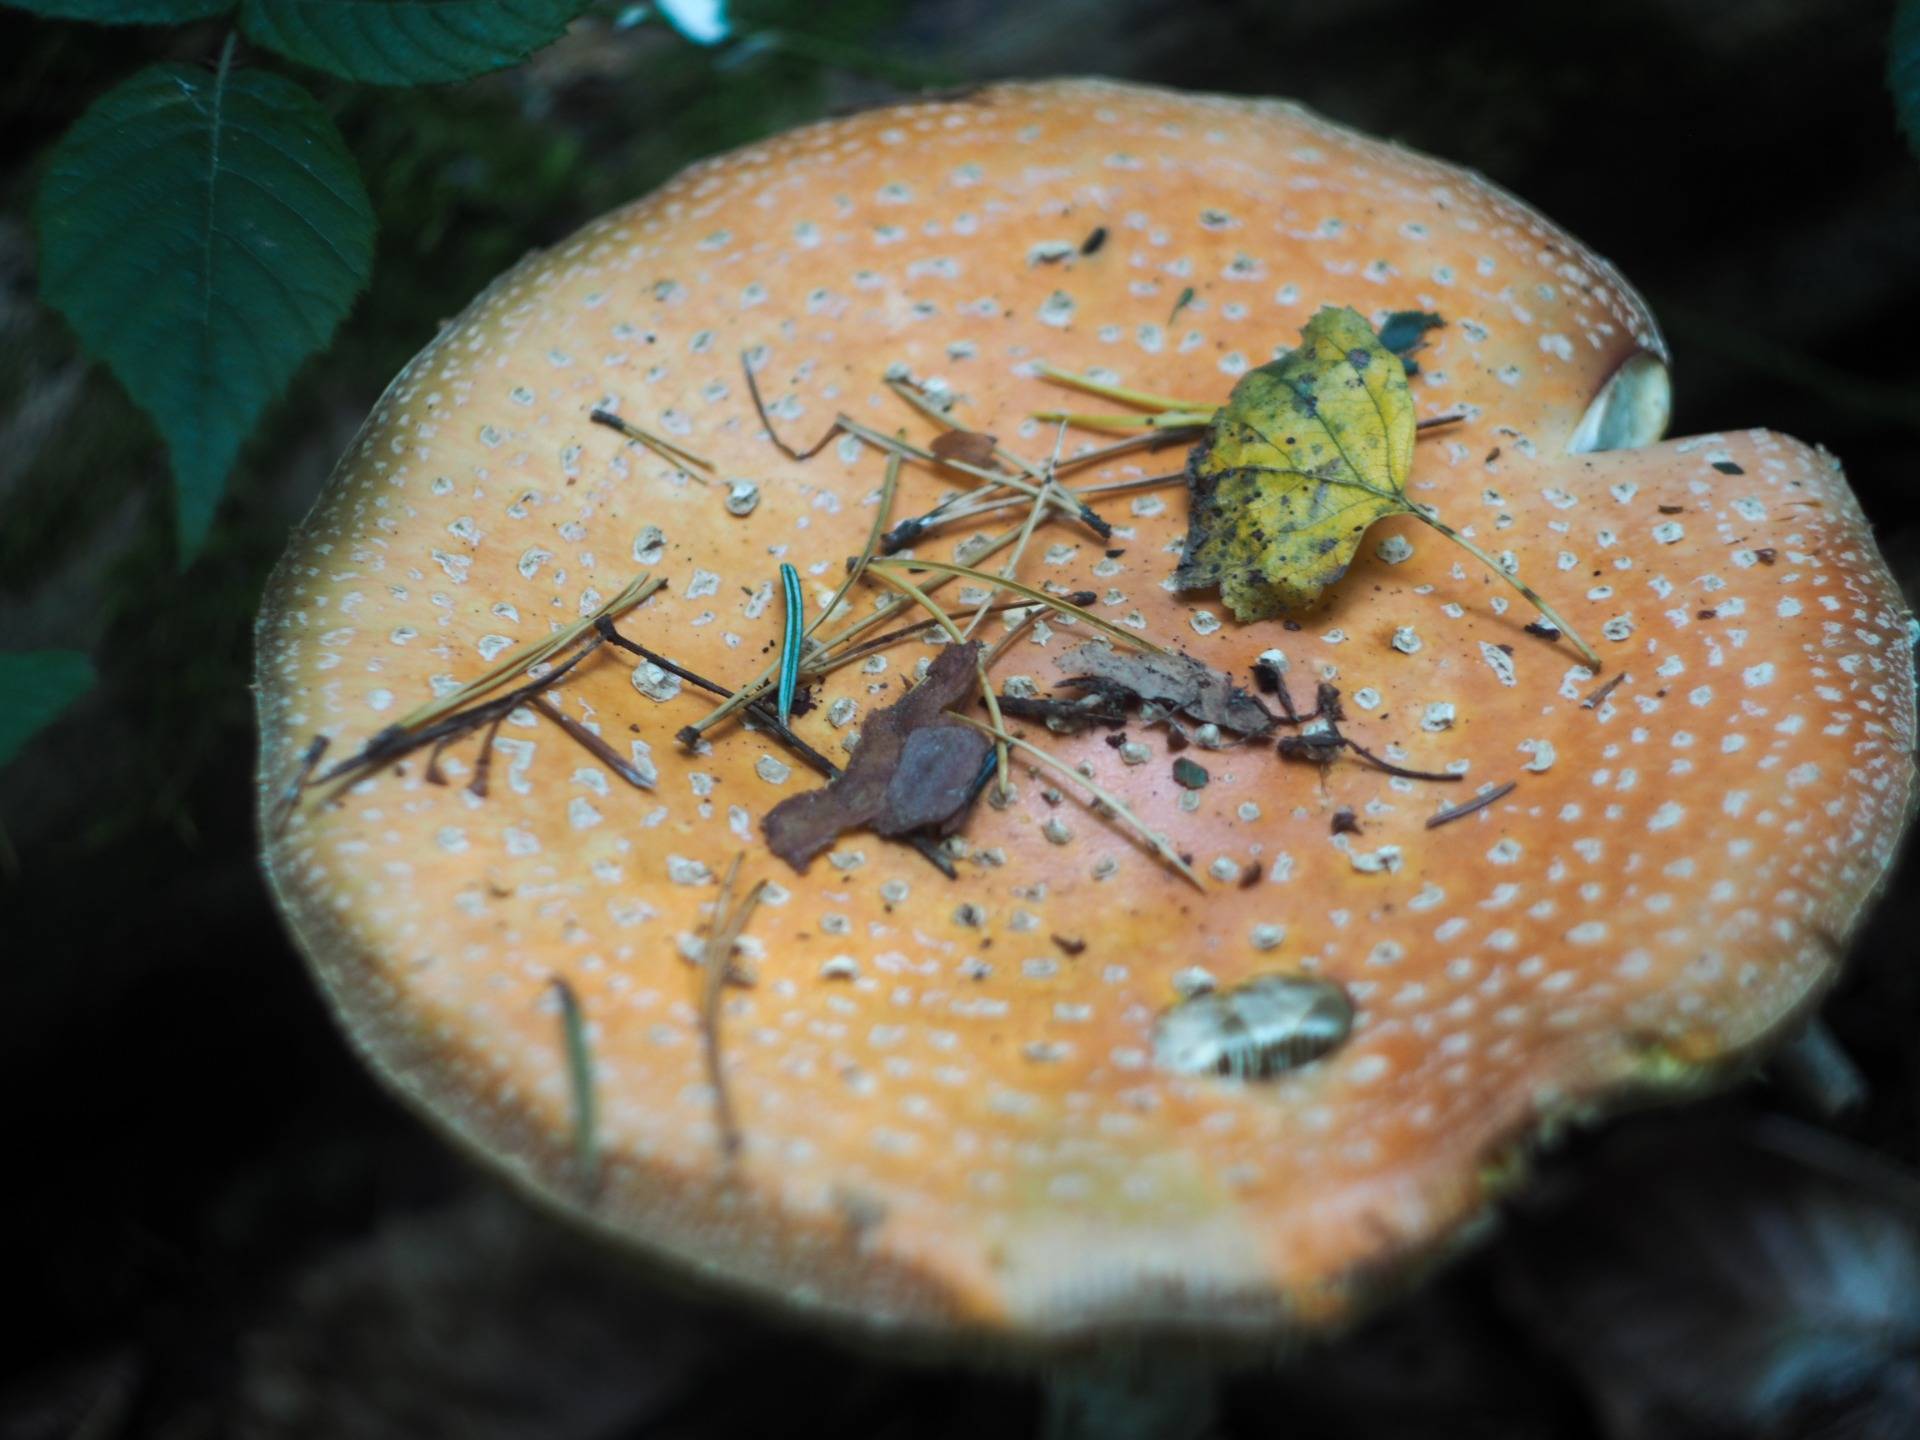 Fully open hat of old red fly agaric